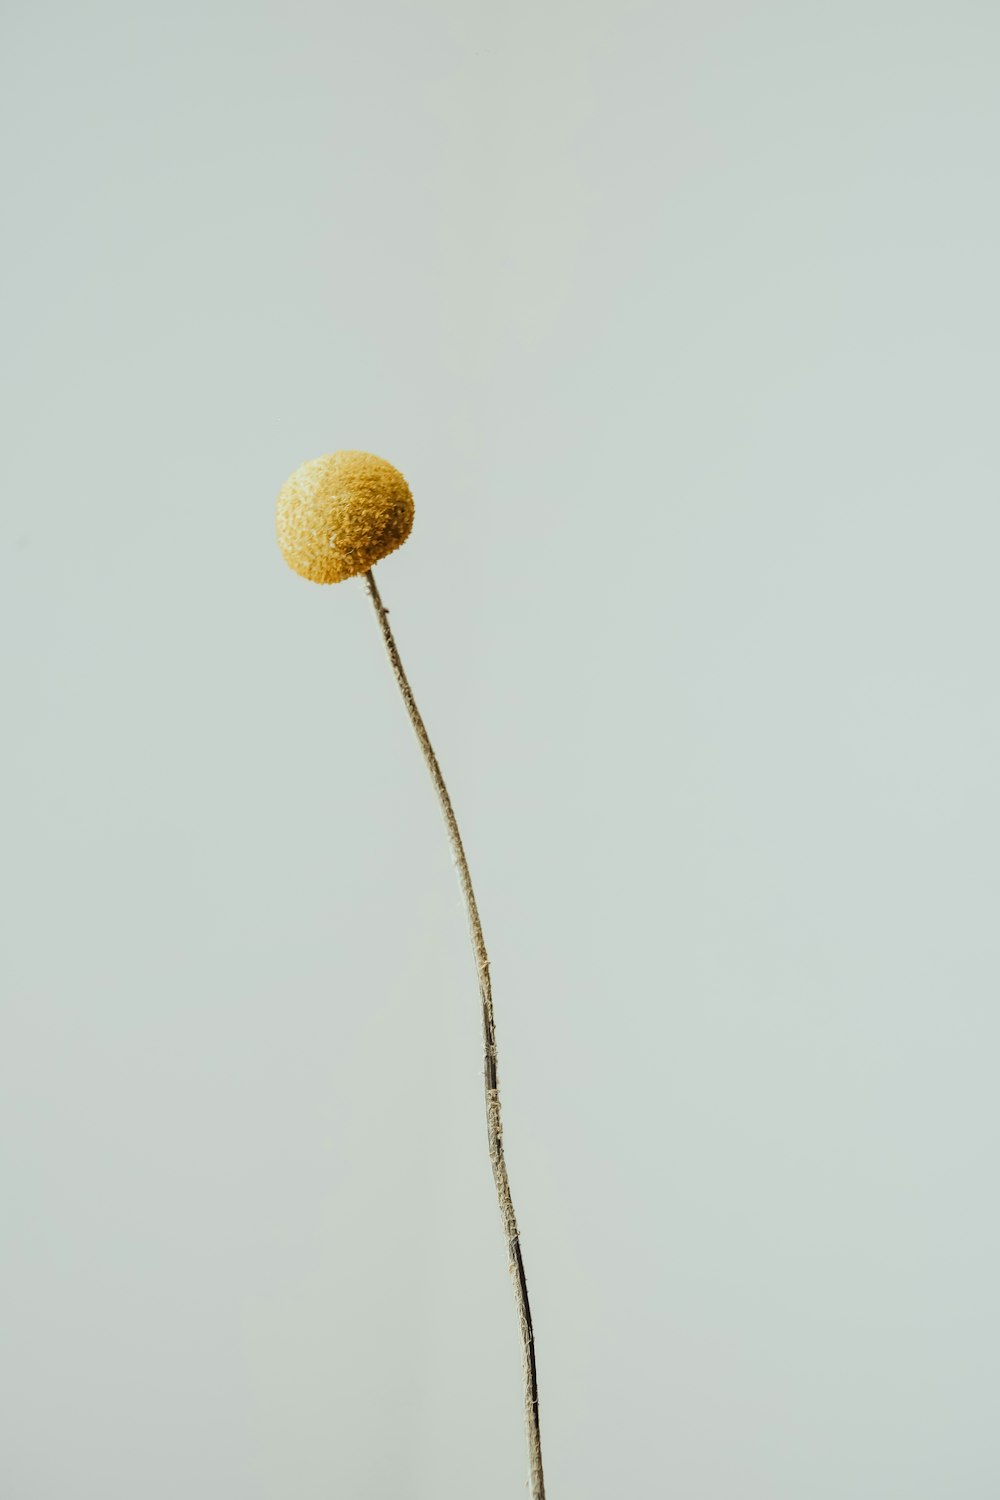 a plant with a yellow ball on top of it